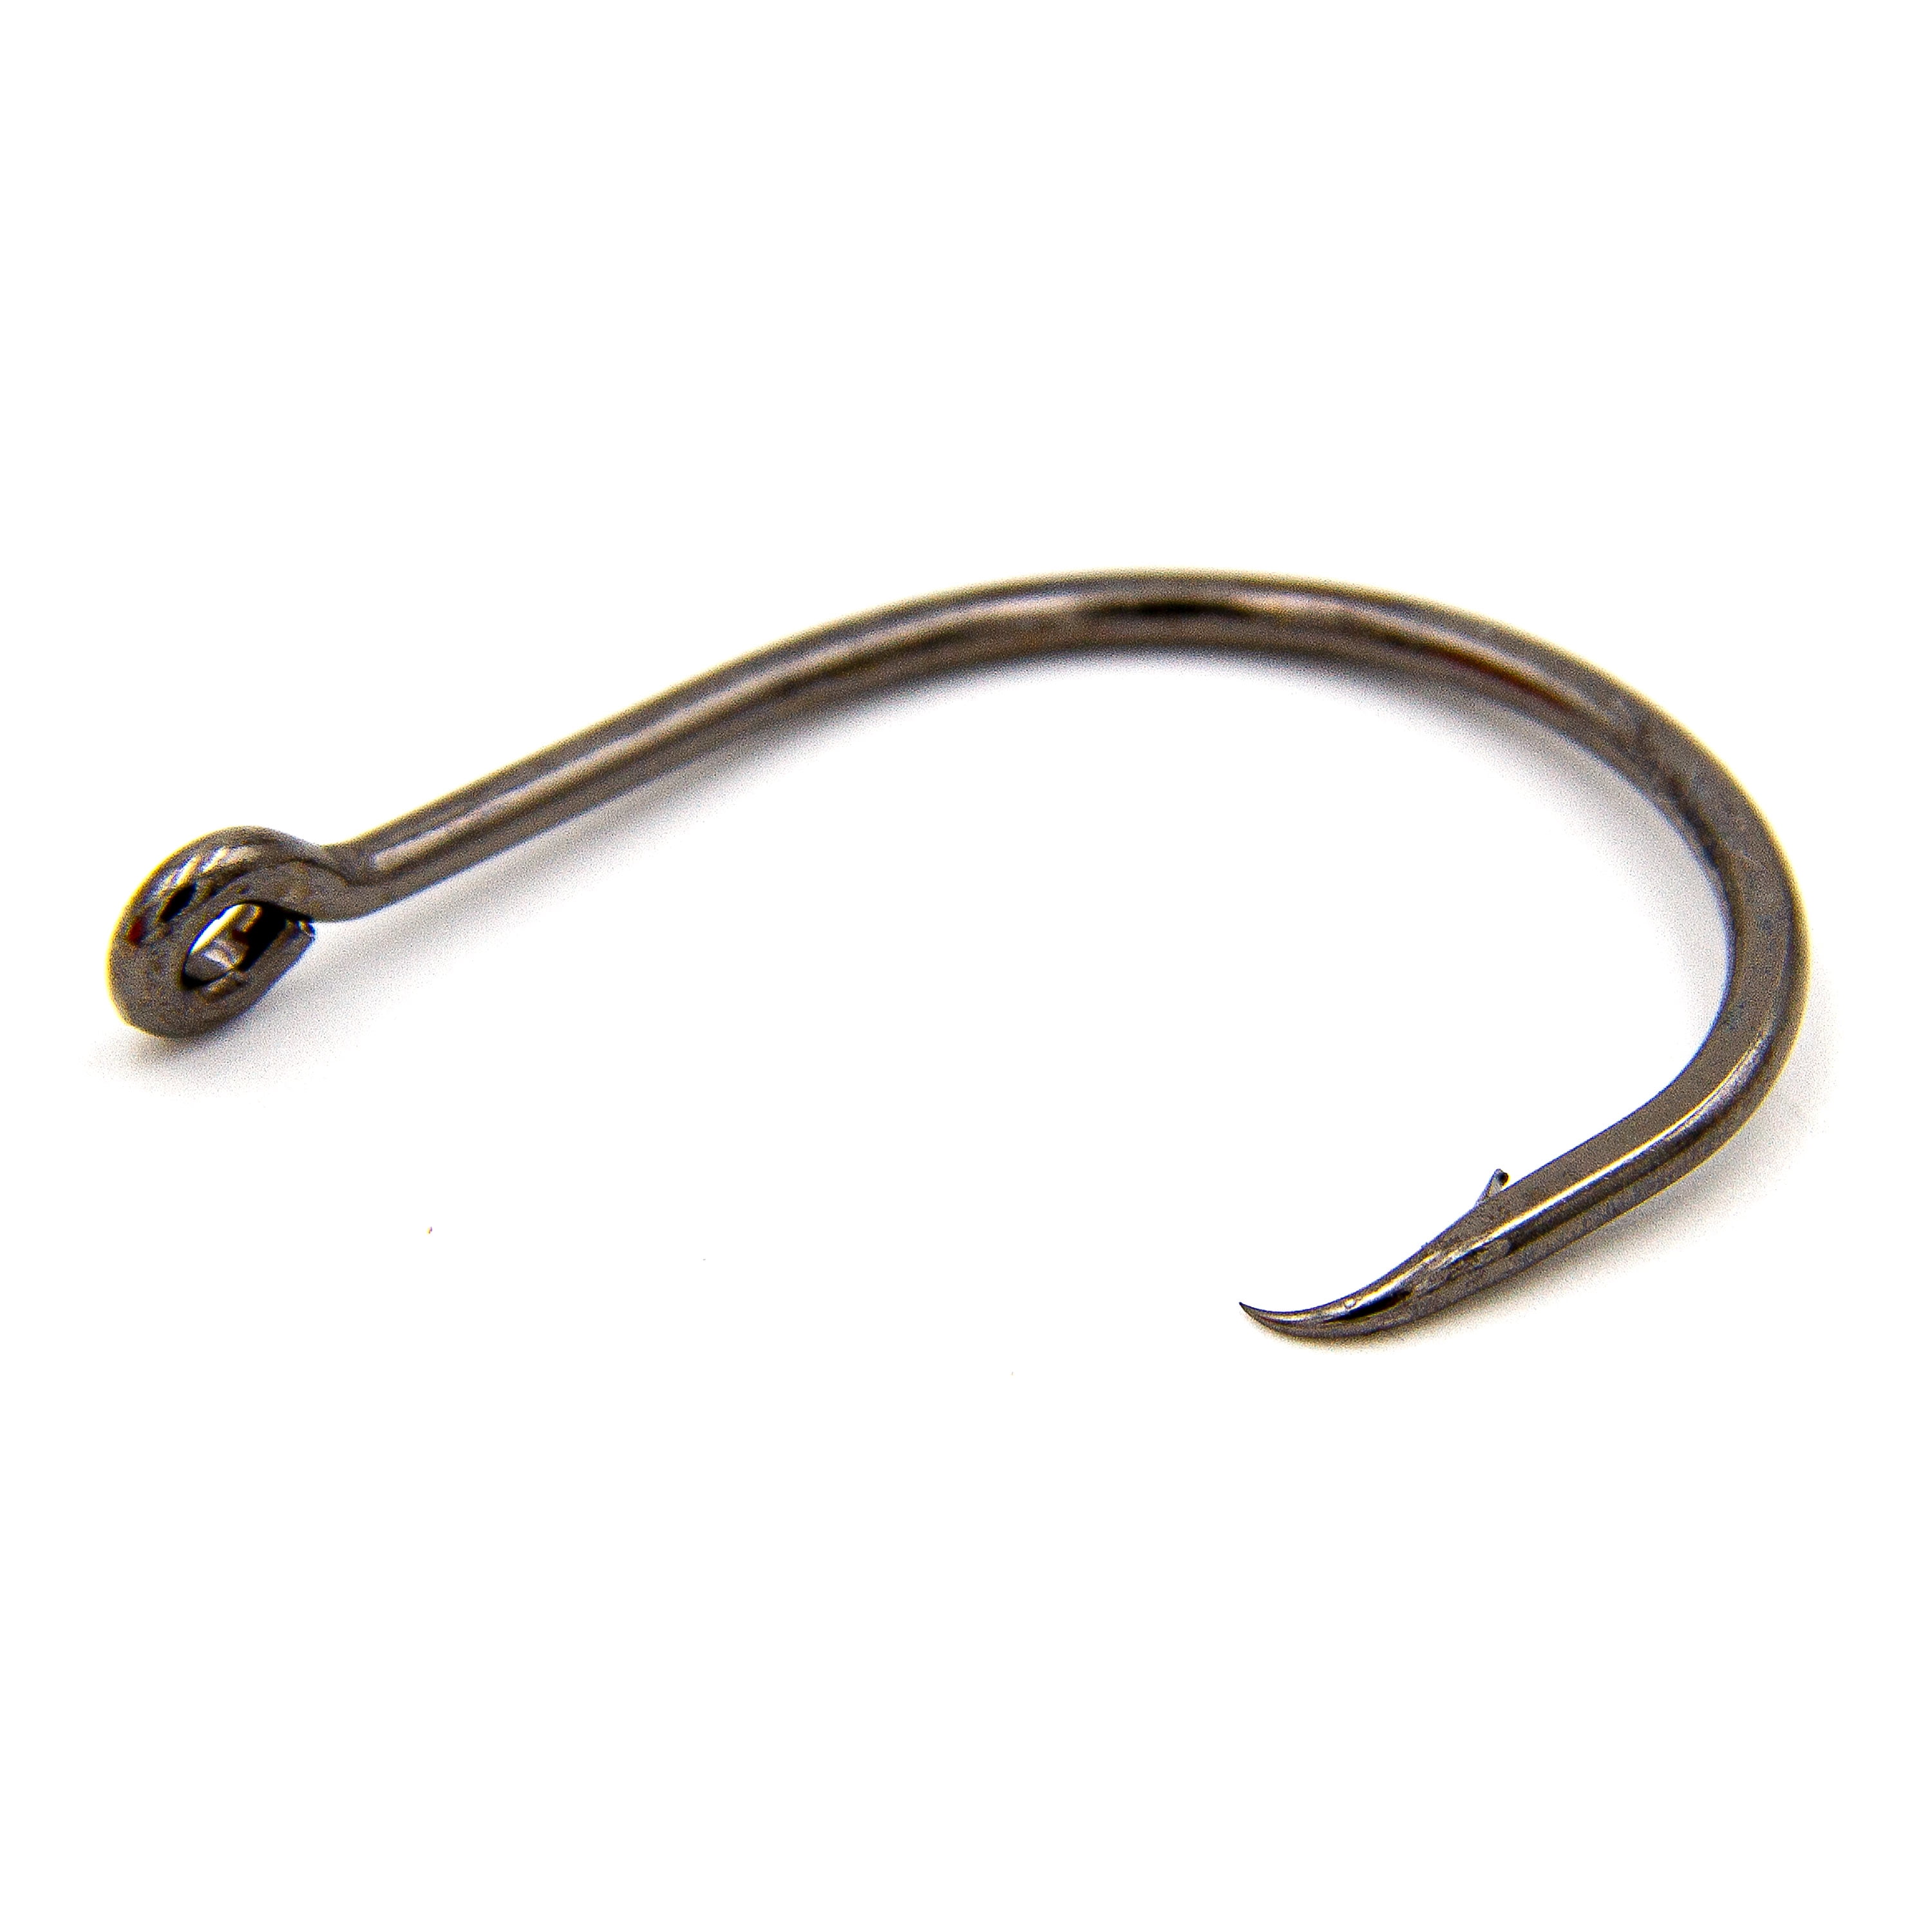 Circle Hook For Pan Fishhigh Carbon Steel Circle Hooks For Pan